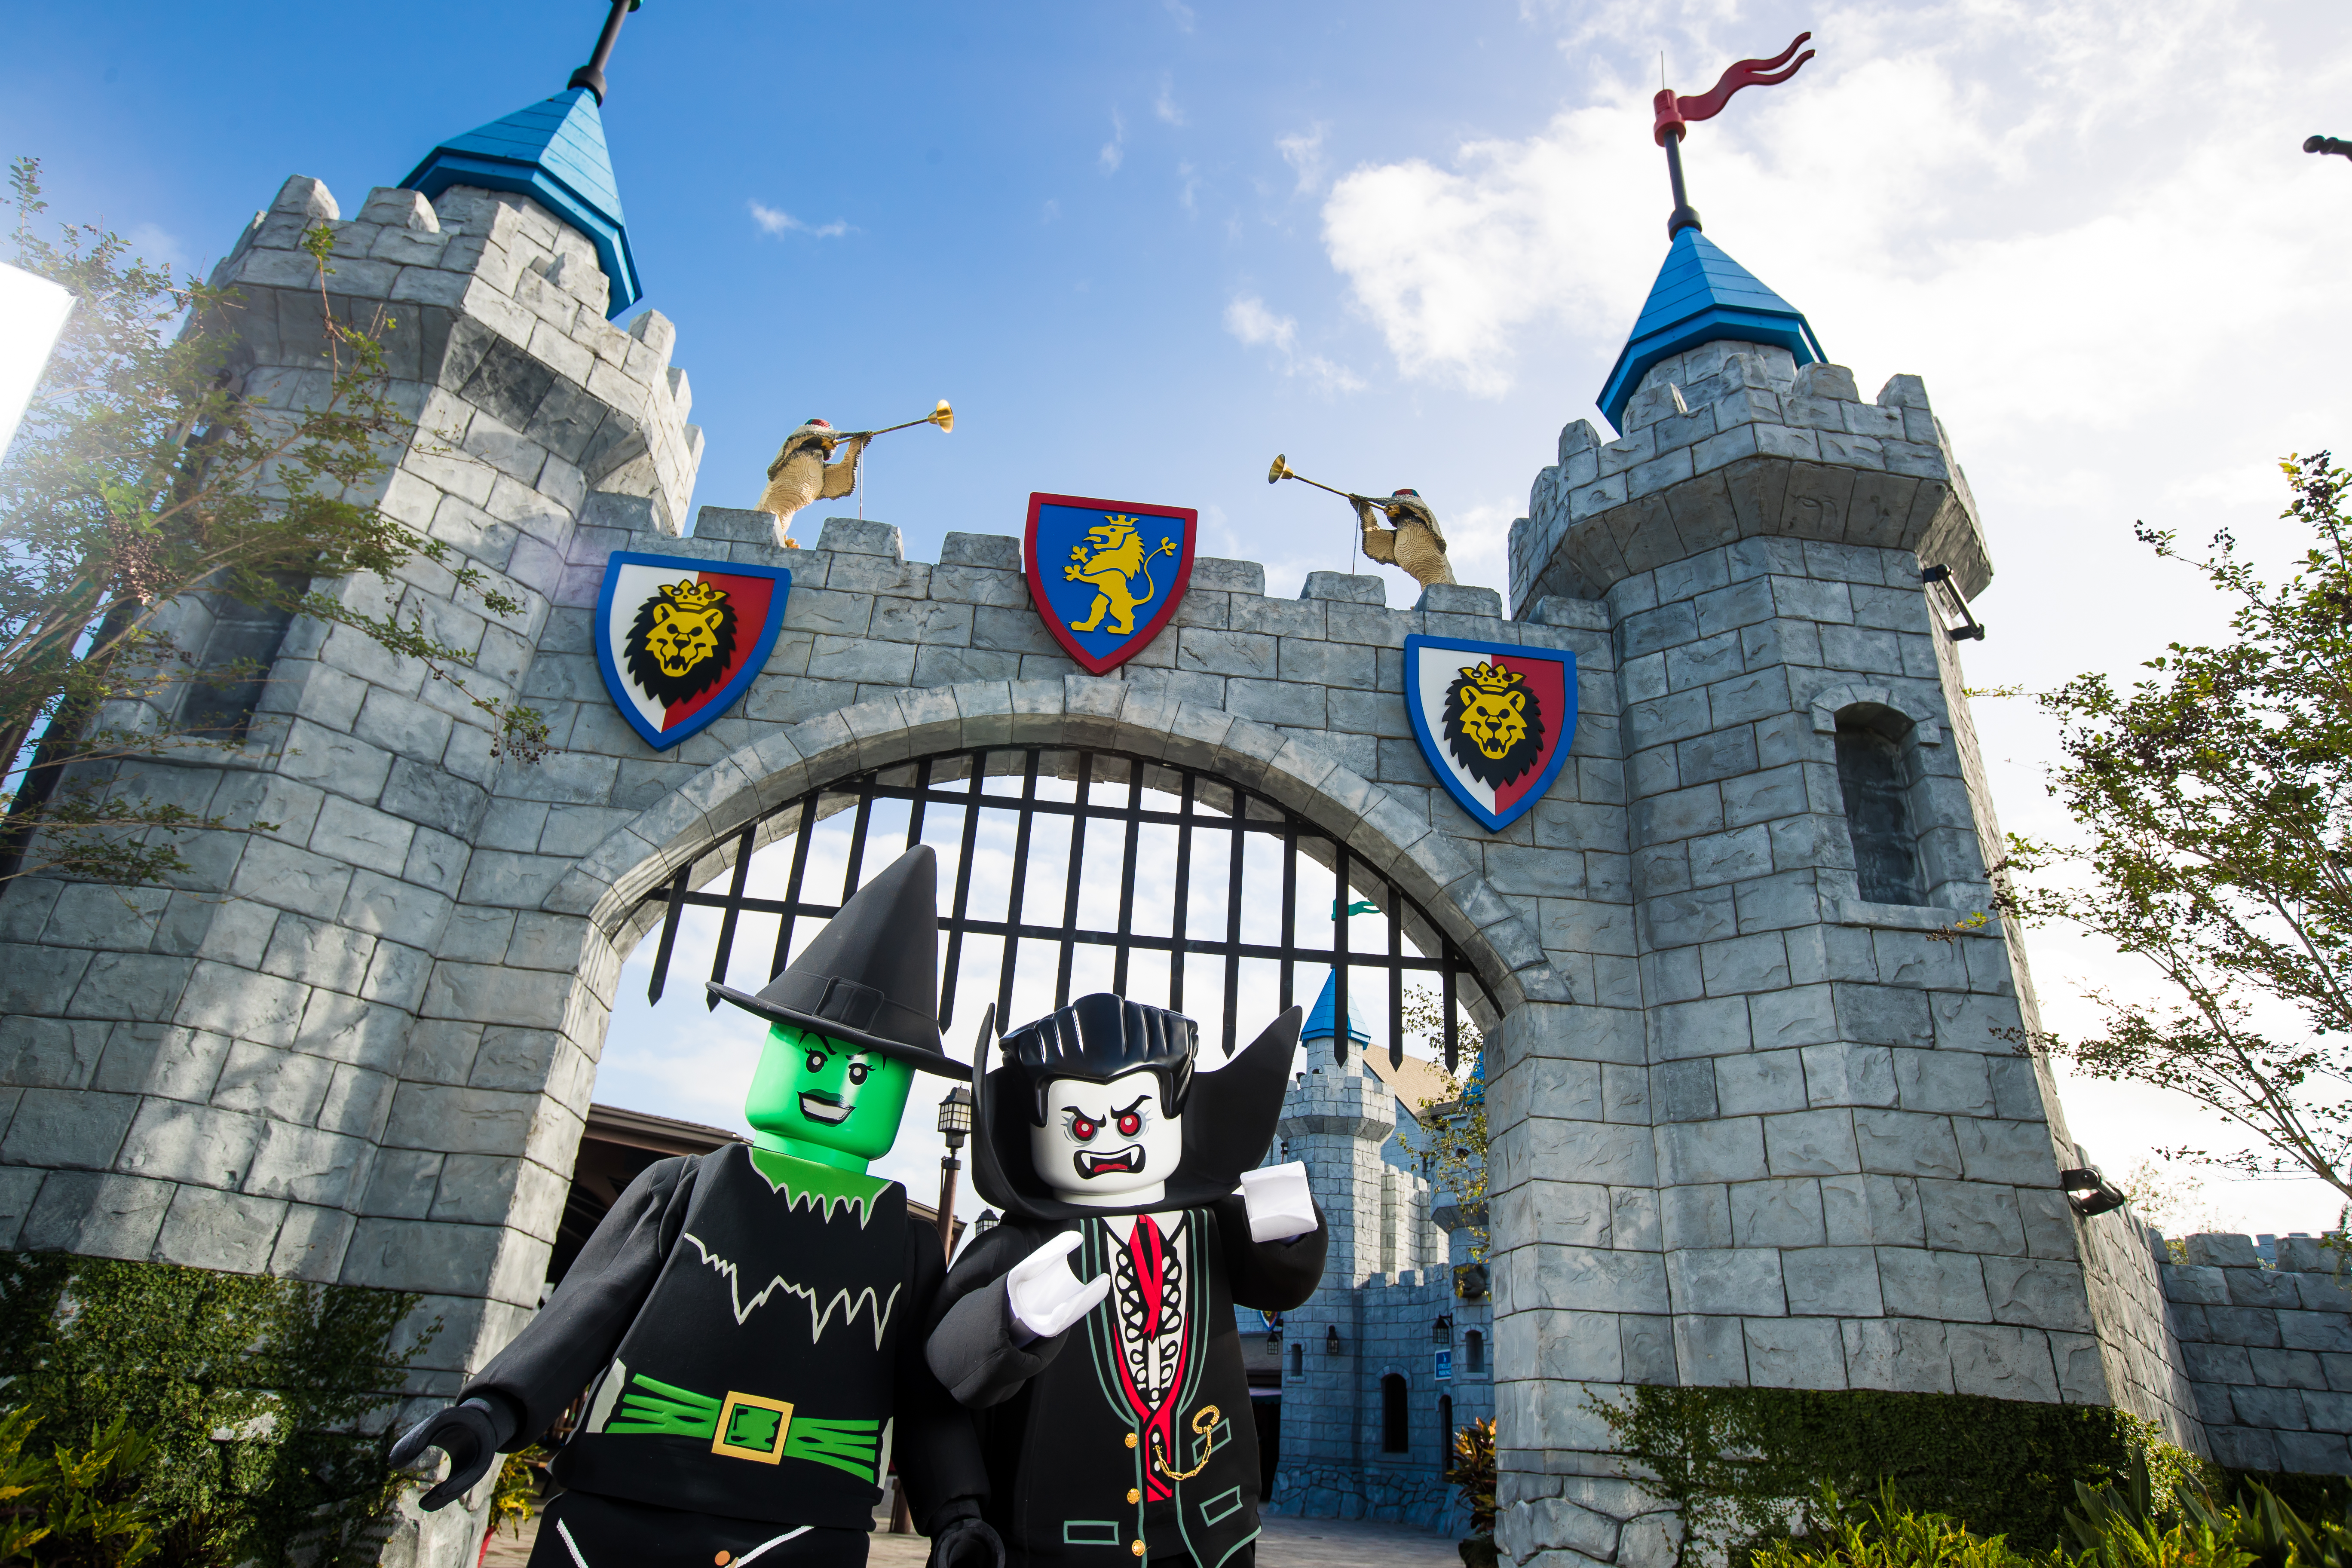 Brick or Treat Returns to LEGOLAND® Florida Resort This October with More Dates, Candy and Entertainment